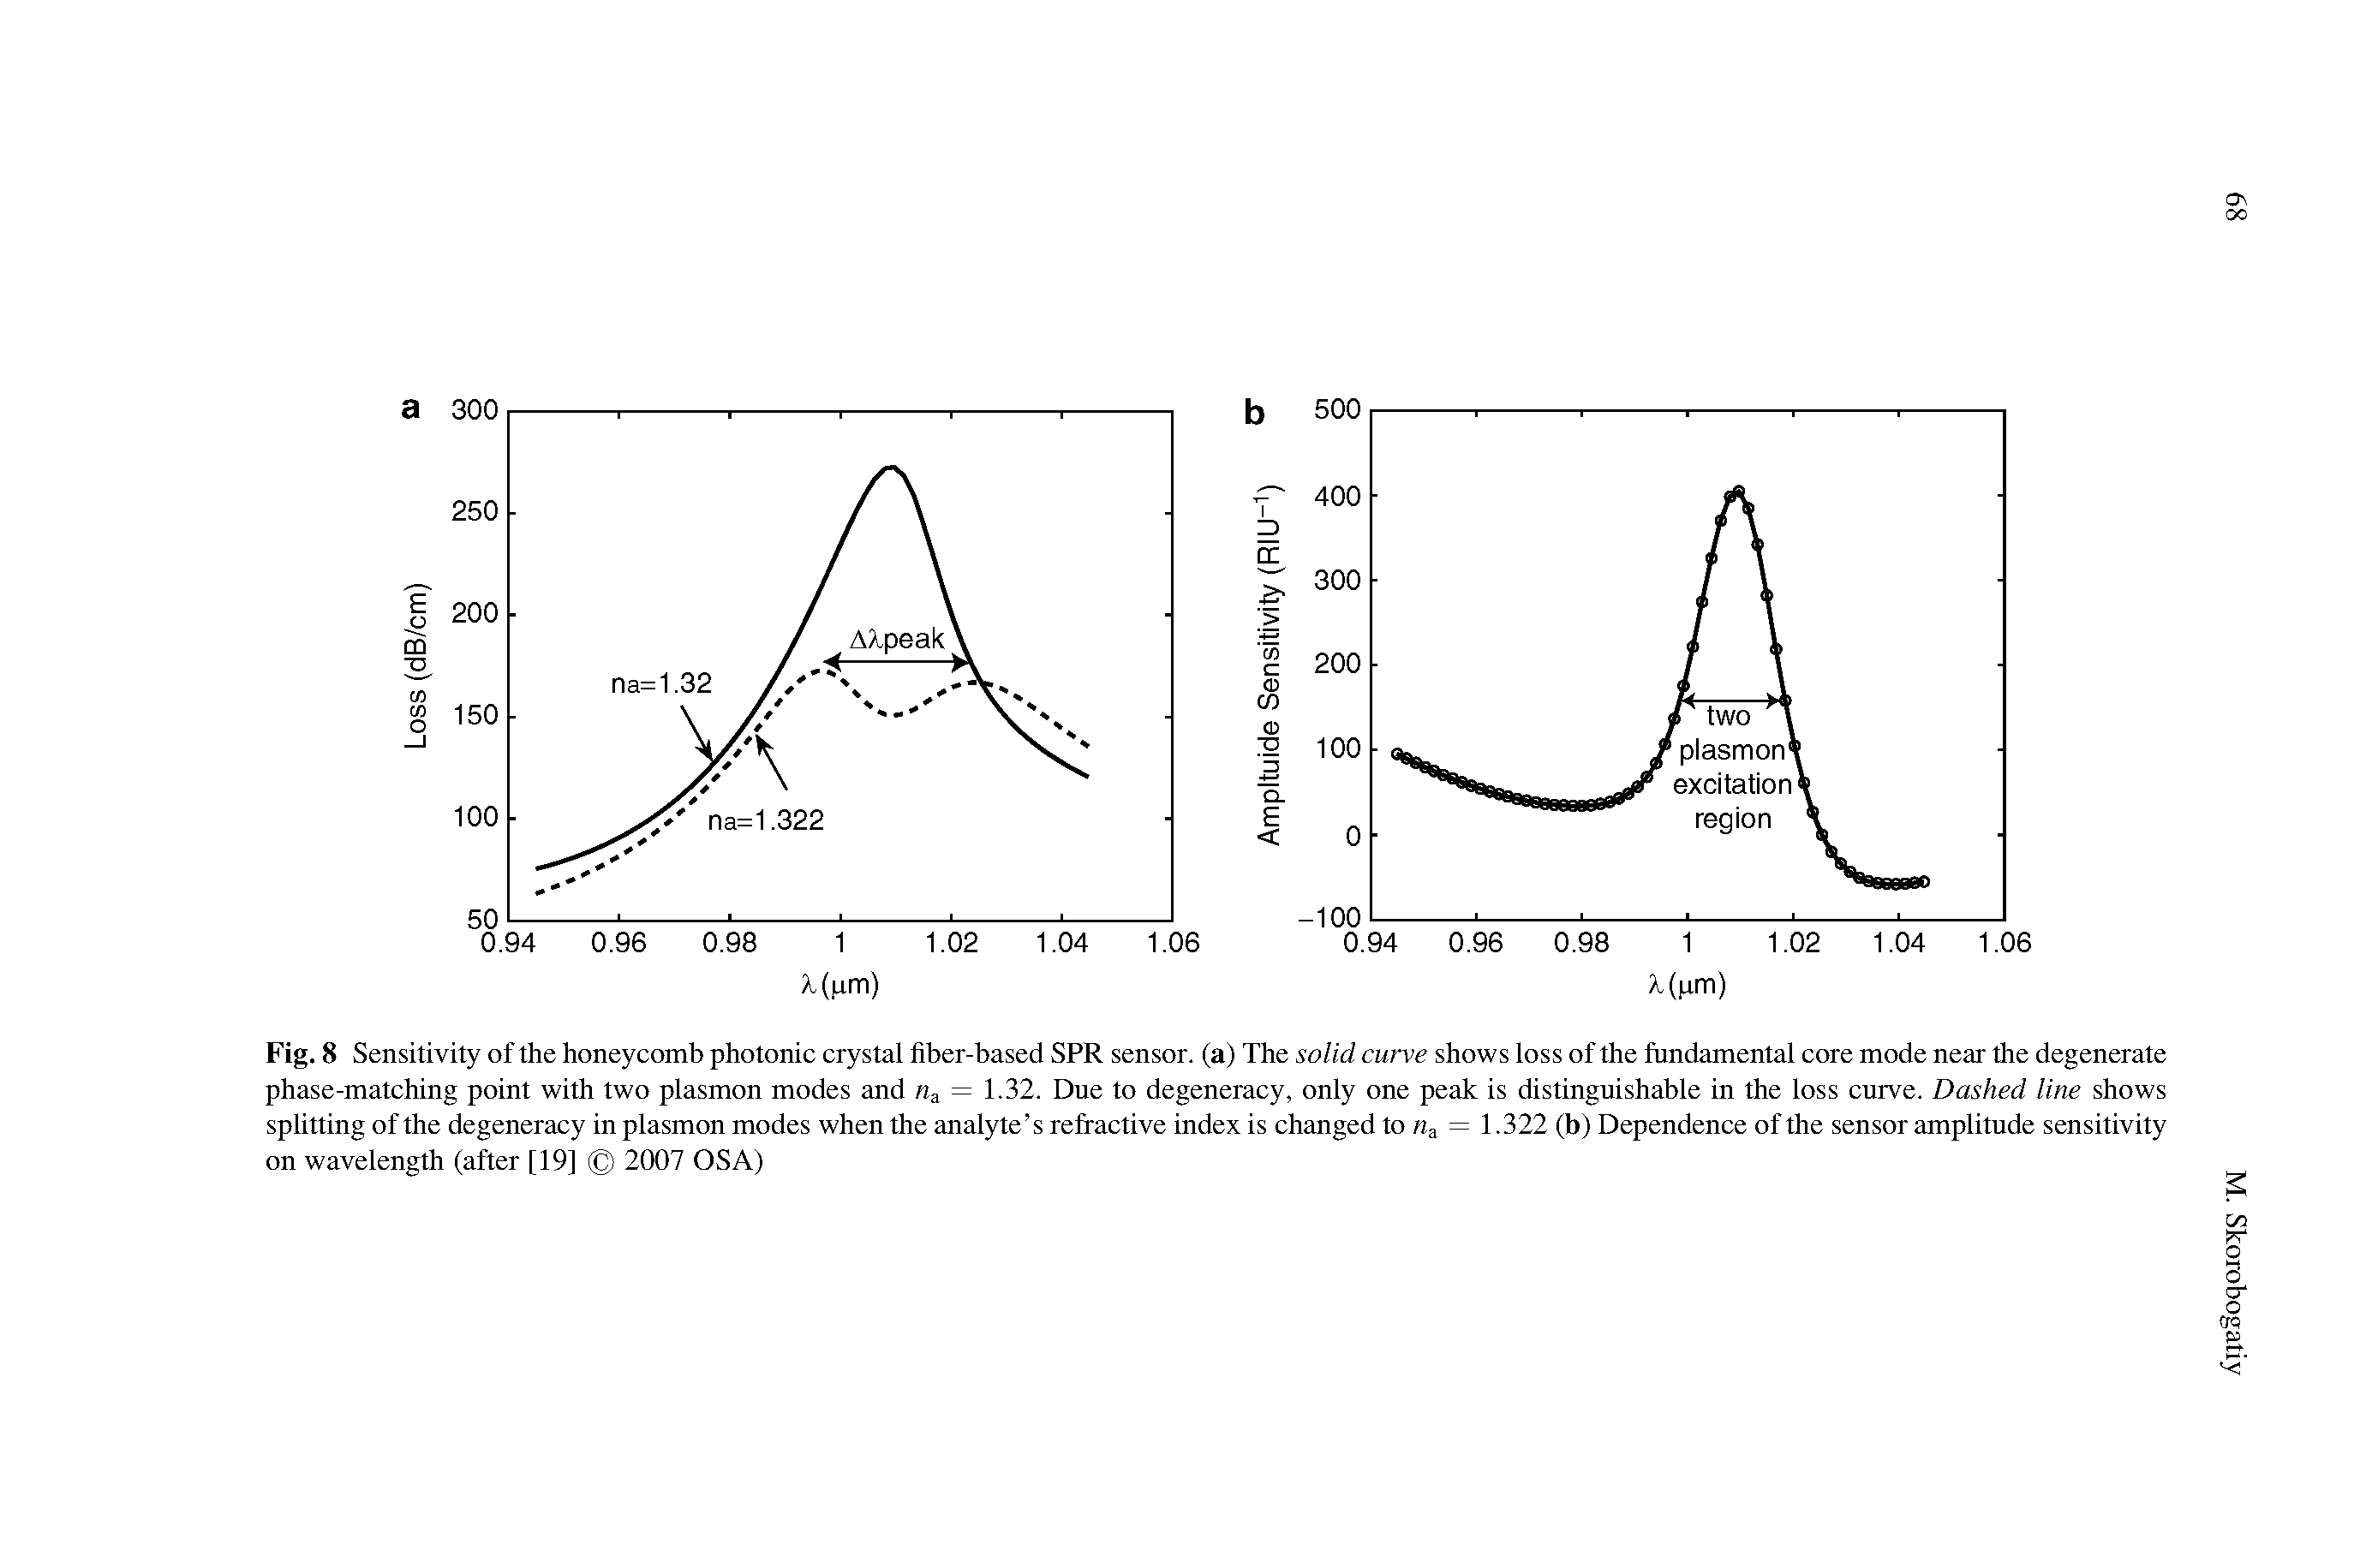 Fig. 8 Sensitivity of the honeycomb photonic crystal fiber-based SPR sensor, (a) The solid curve shows loss of the fundamental core mode near the degenerate phase-matching point with two plasmon modes and = 1.32. Due to degeneracy, only one peak is distinguishable in the loss curve. Dashed line shows splitting of the degeneracy in plasmon modes when the analyte s refractive index is changed to = 1.322 (b) Dependence of the sensor amplitude sensitivity on wavelength (after [19] (C) 2007 OS A)...